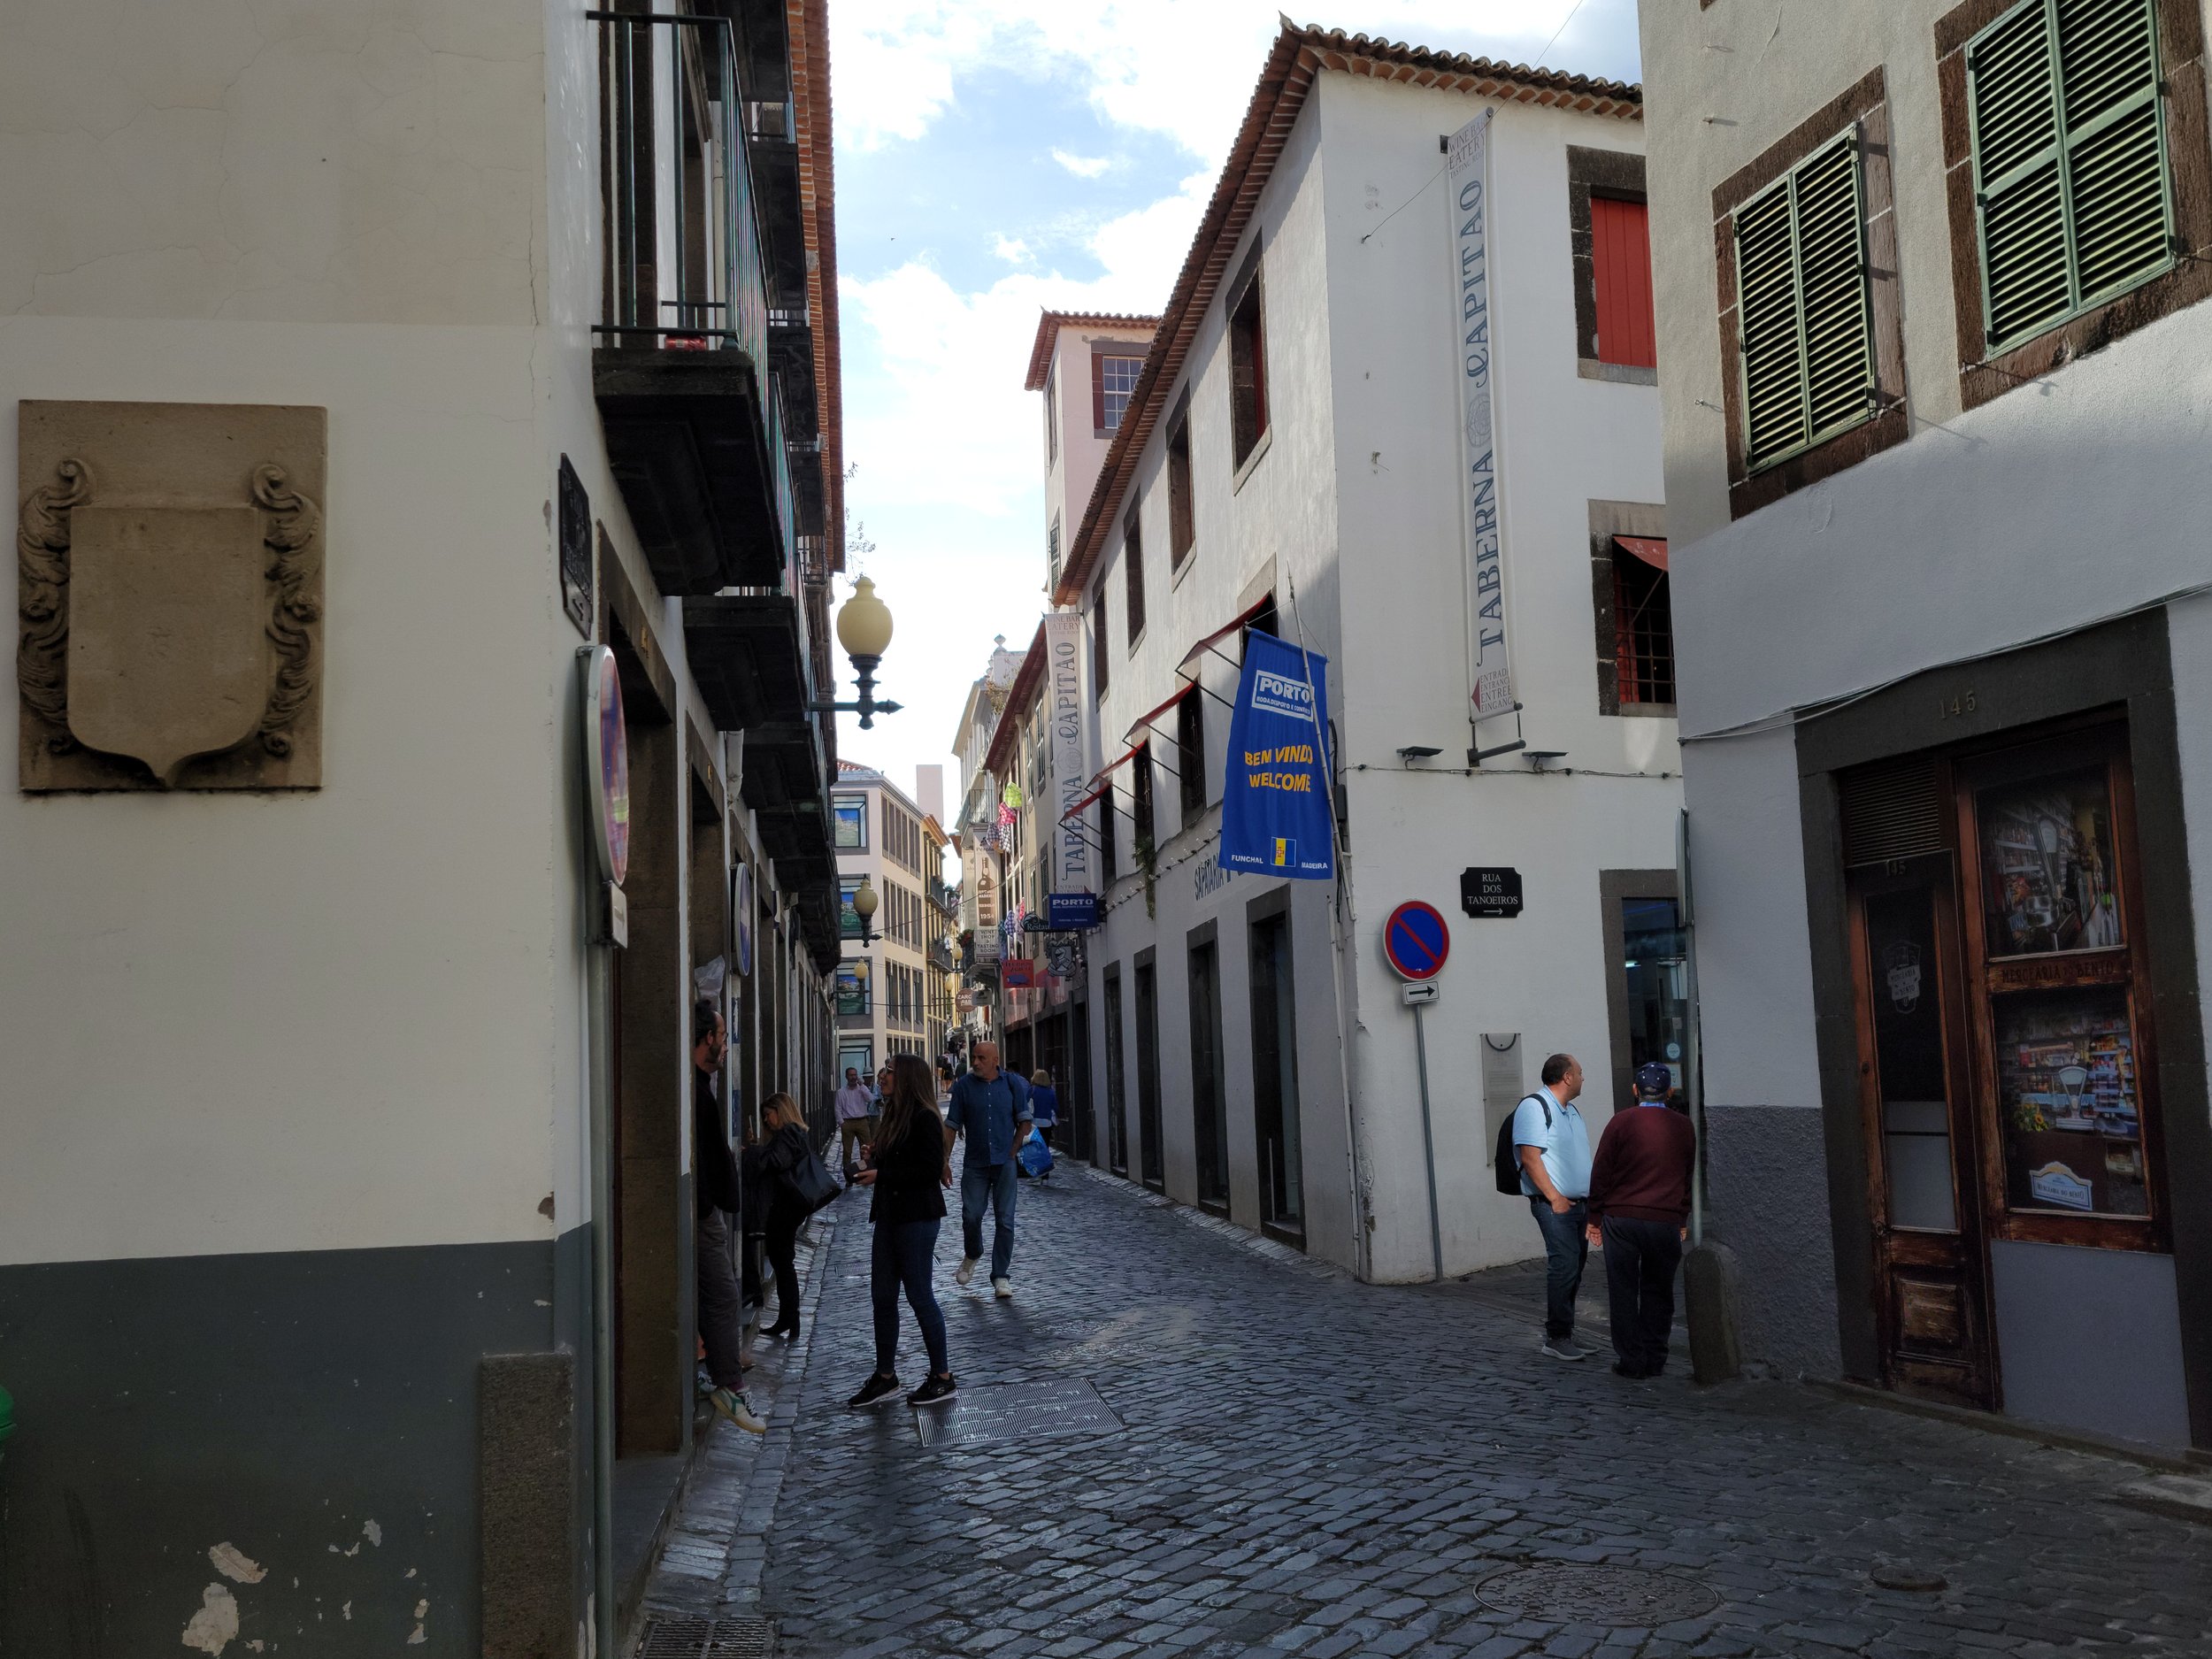 Back in Funchal. The city core consists of many streets such as this one, on cobblestone, with lots of little shops and restaurants.